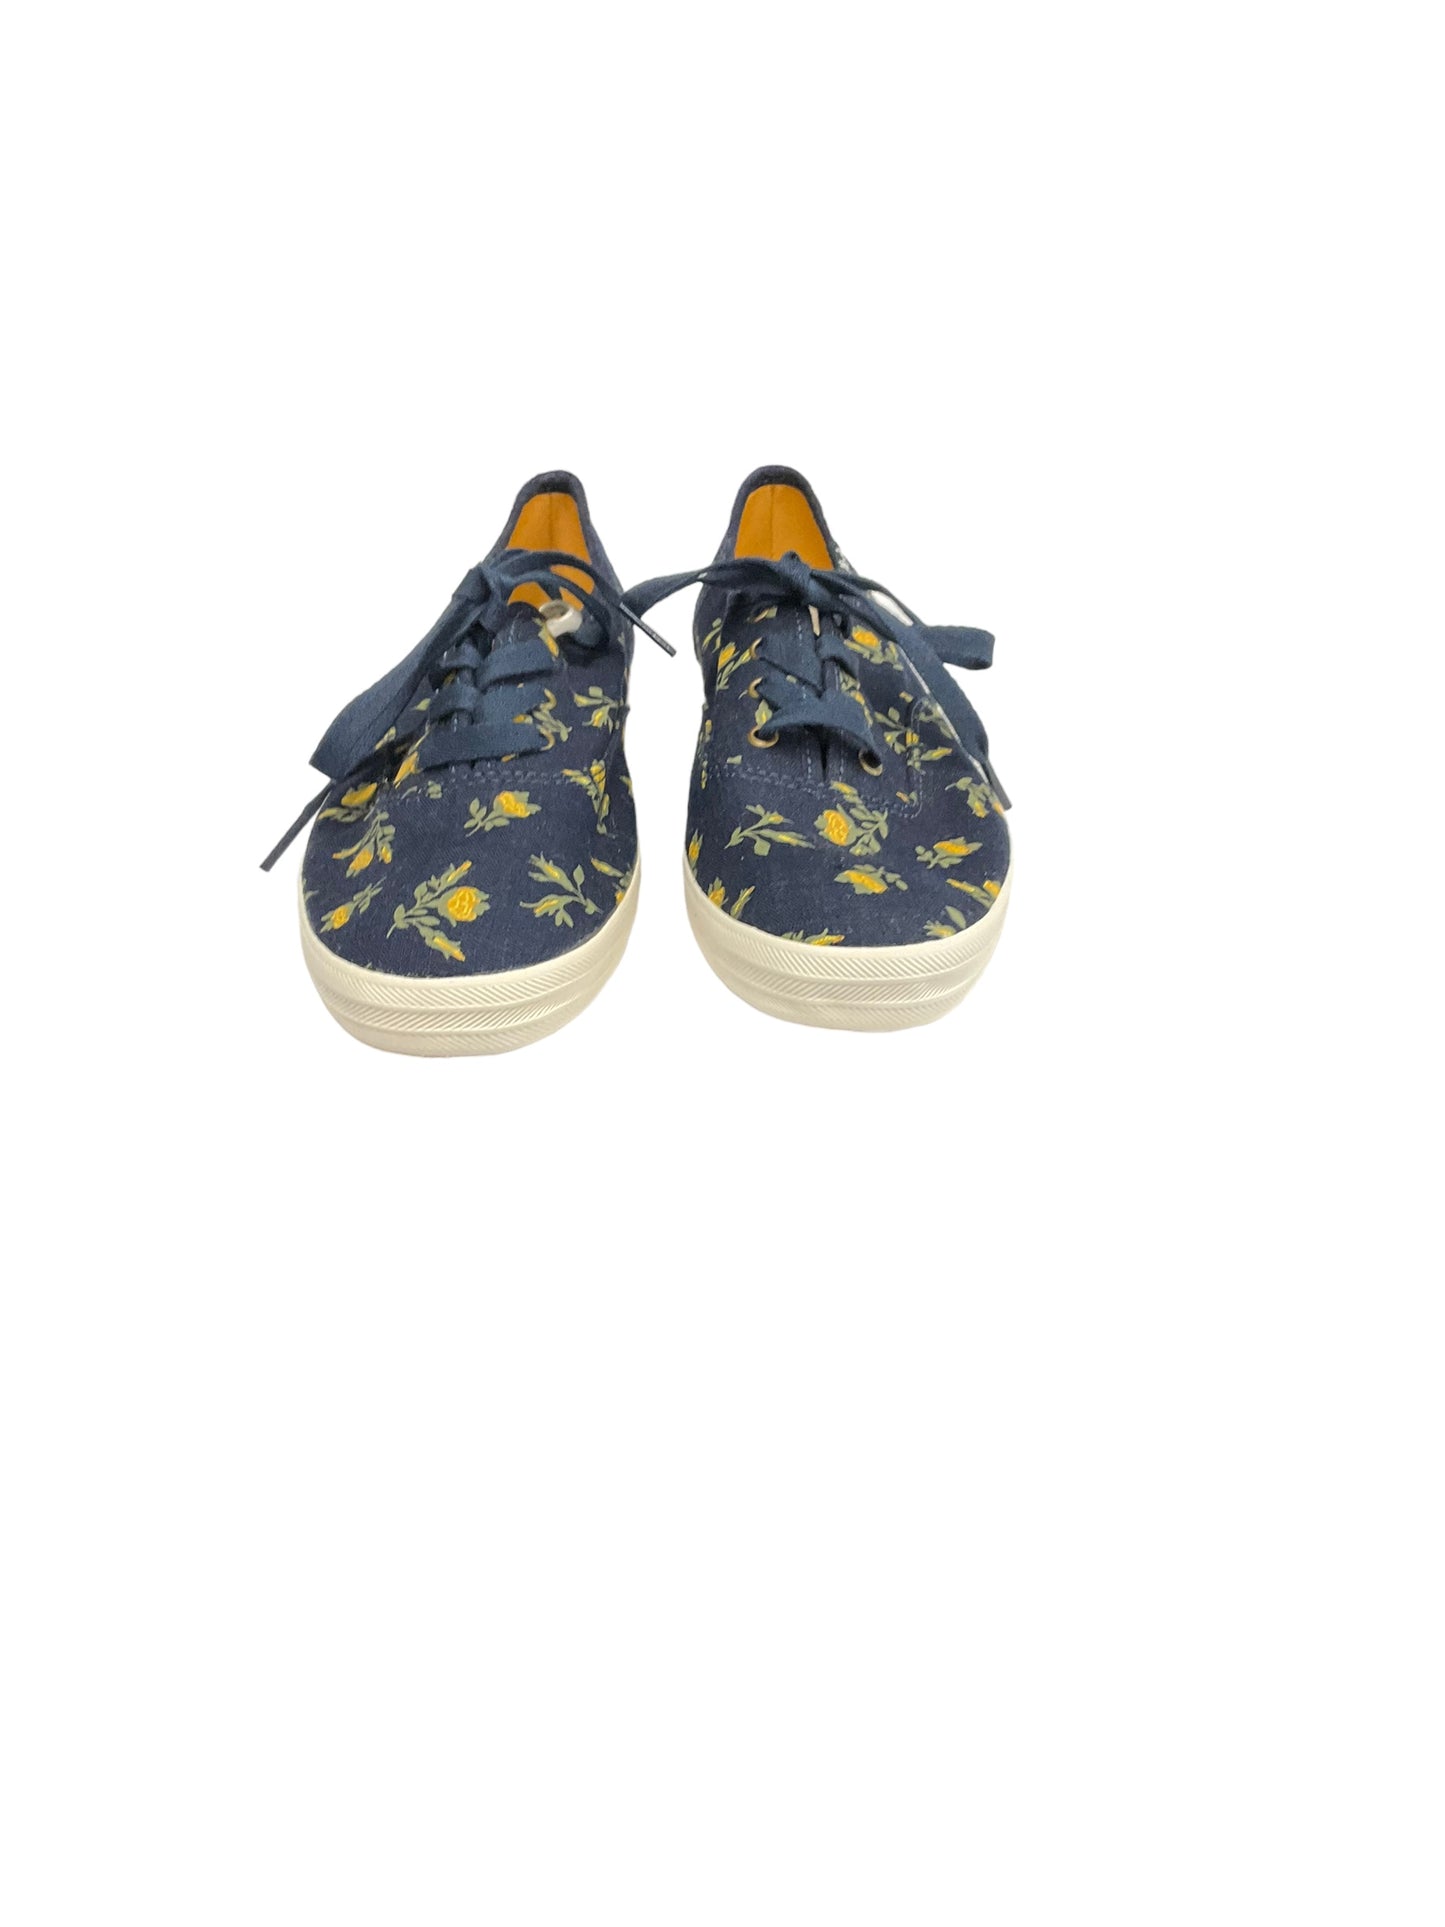 Shoes Flats By Keds  Size: 8